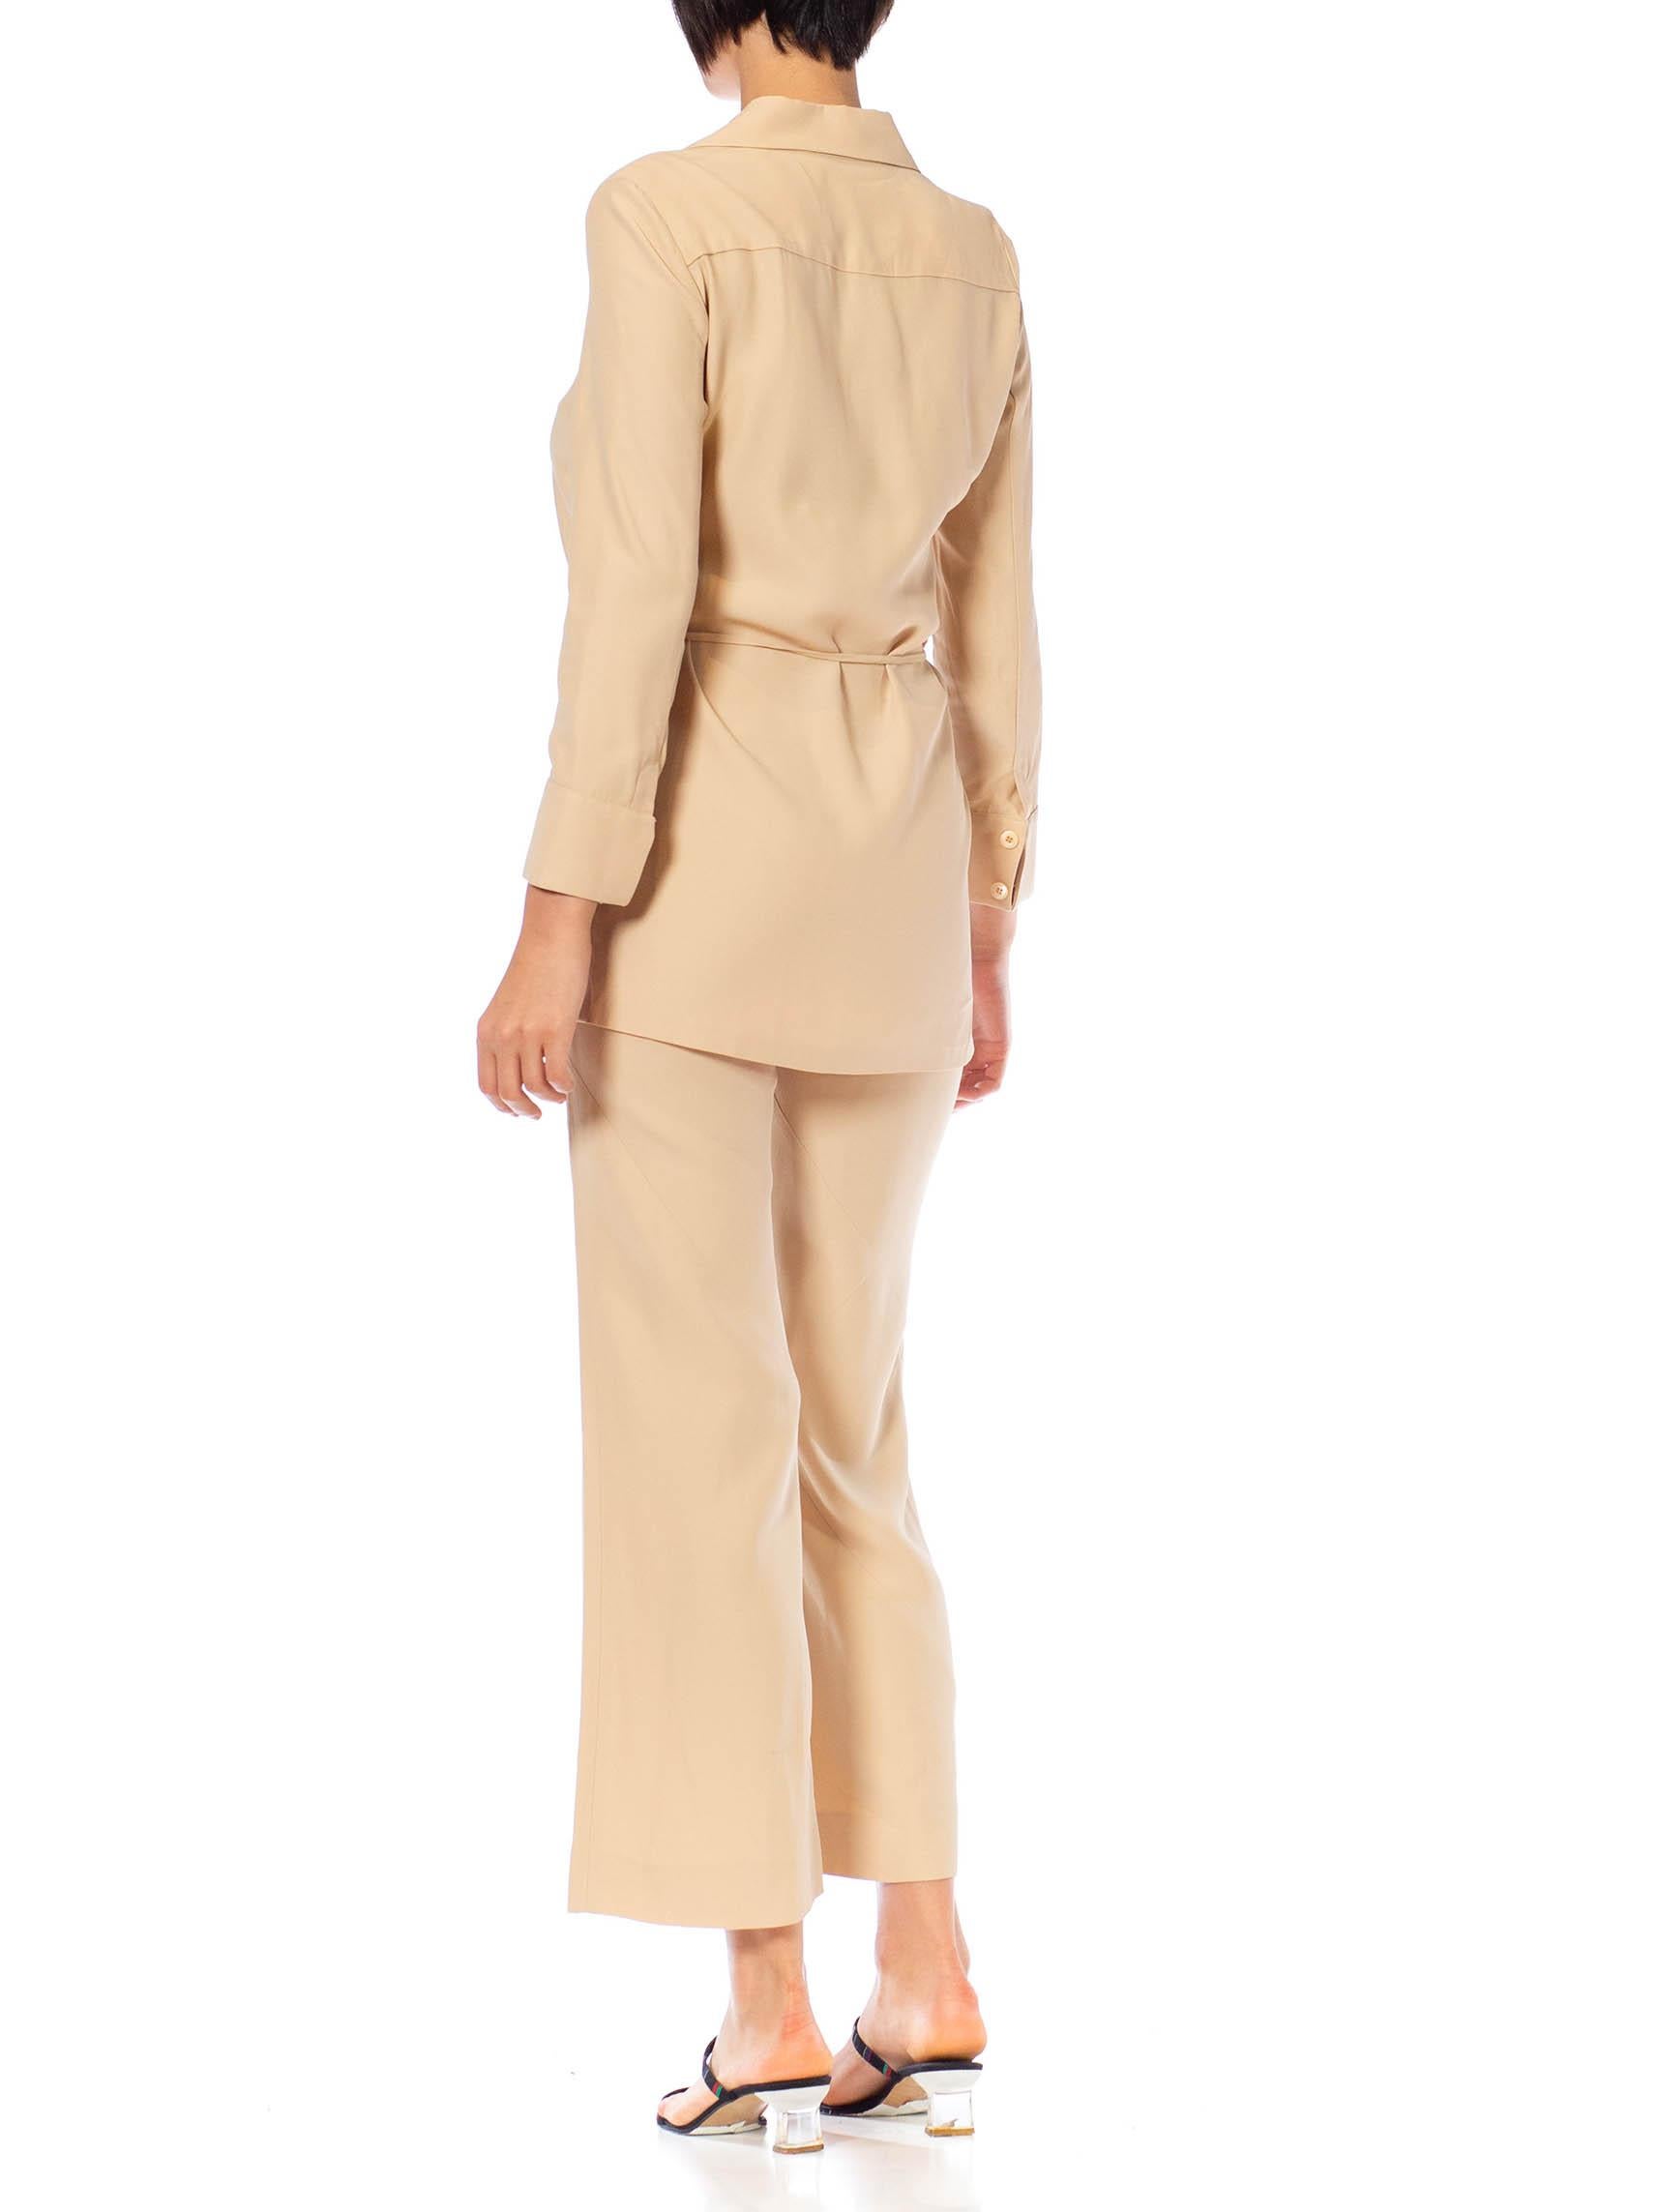 Morphew Vintage Gucci Beige Acetate & Rayon Crepe Back Satin Pant & Wrap Blouse  In Excellent Condition For Sale In New York, NY